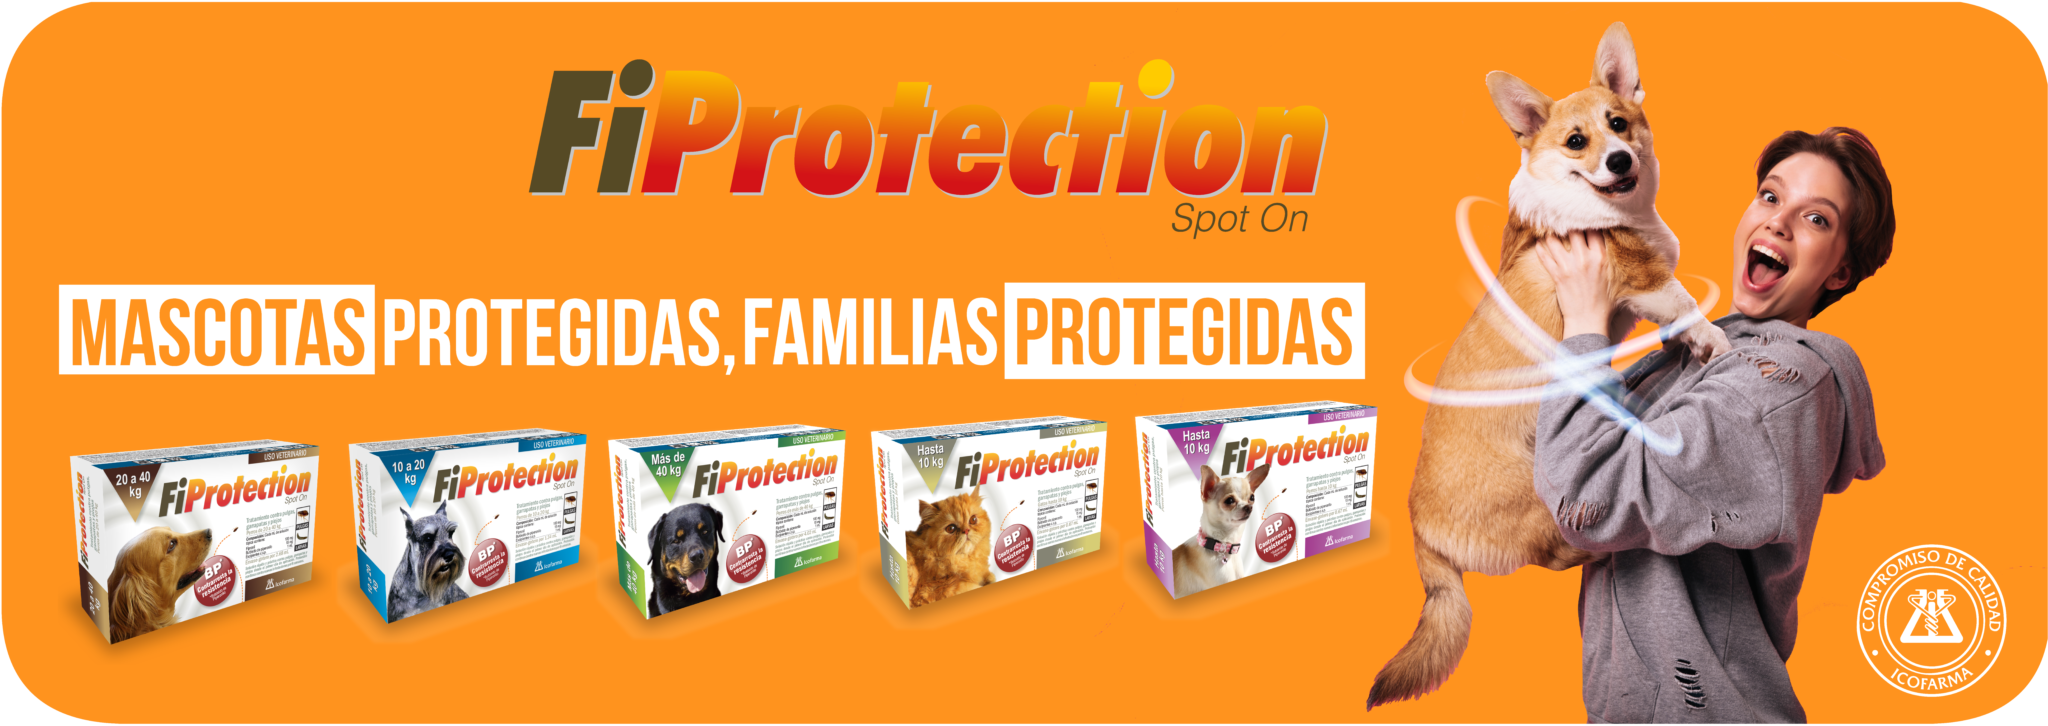 fiprotection banner fuhd-01